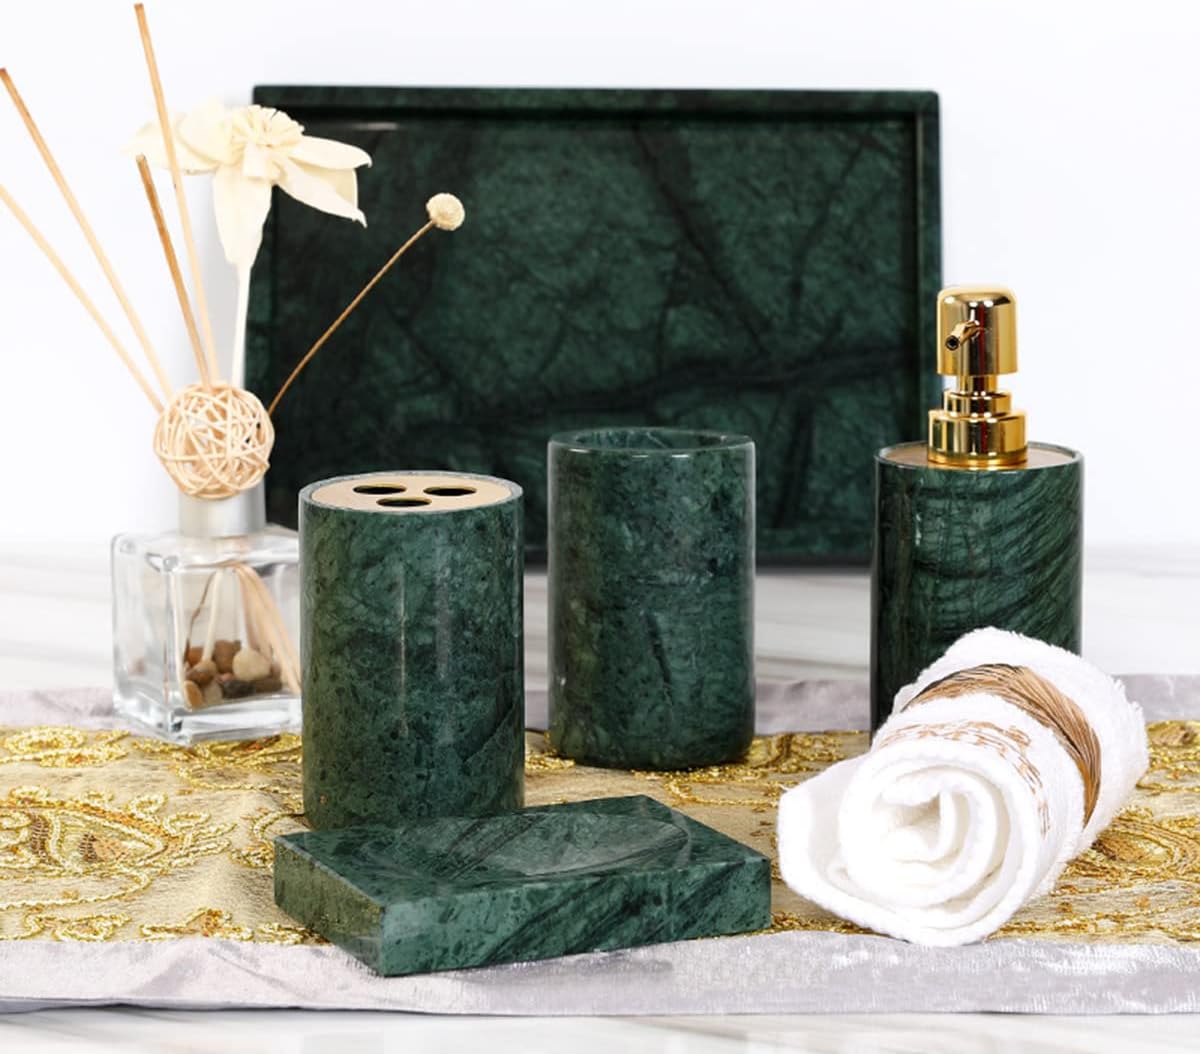 Natural Marble Bathroom Accessories Set 5 Pcs -Lotion Soap Dispenser, Toothbrush Holder & Cup, Soap Dish, Storage Tray, Washstand Restroom Countertop Essentials Kits, Green